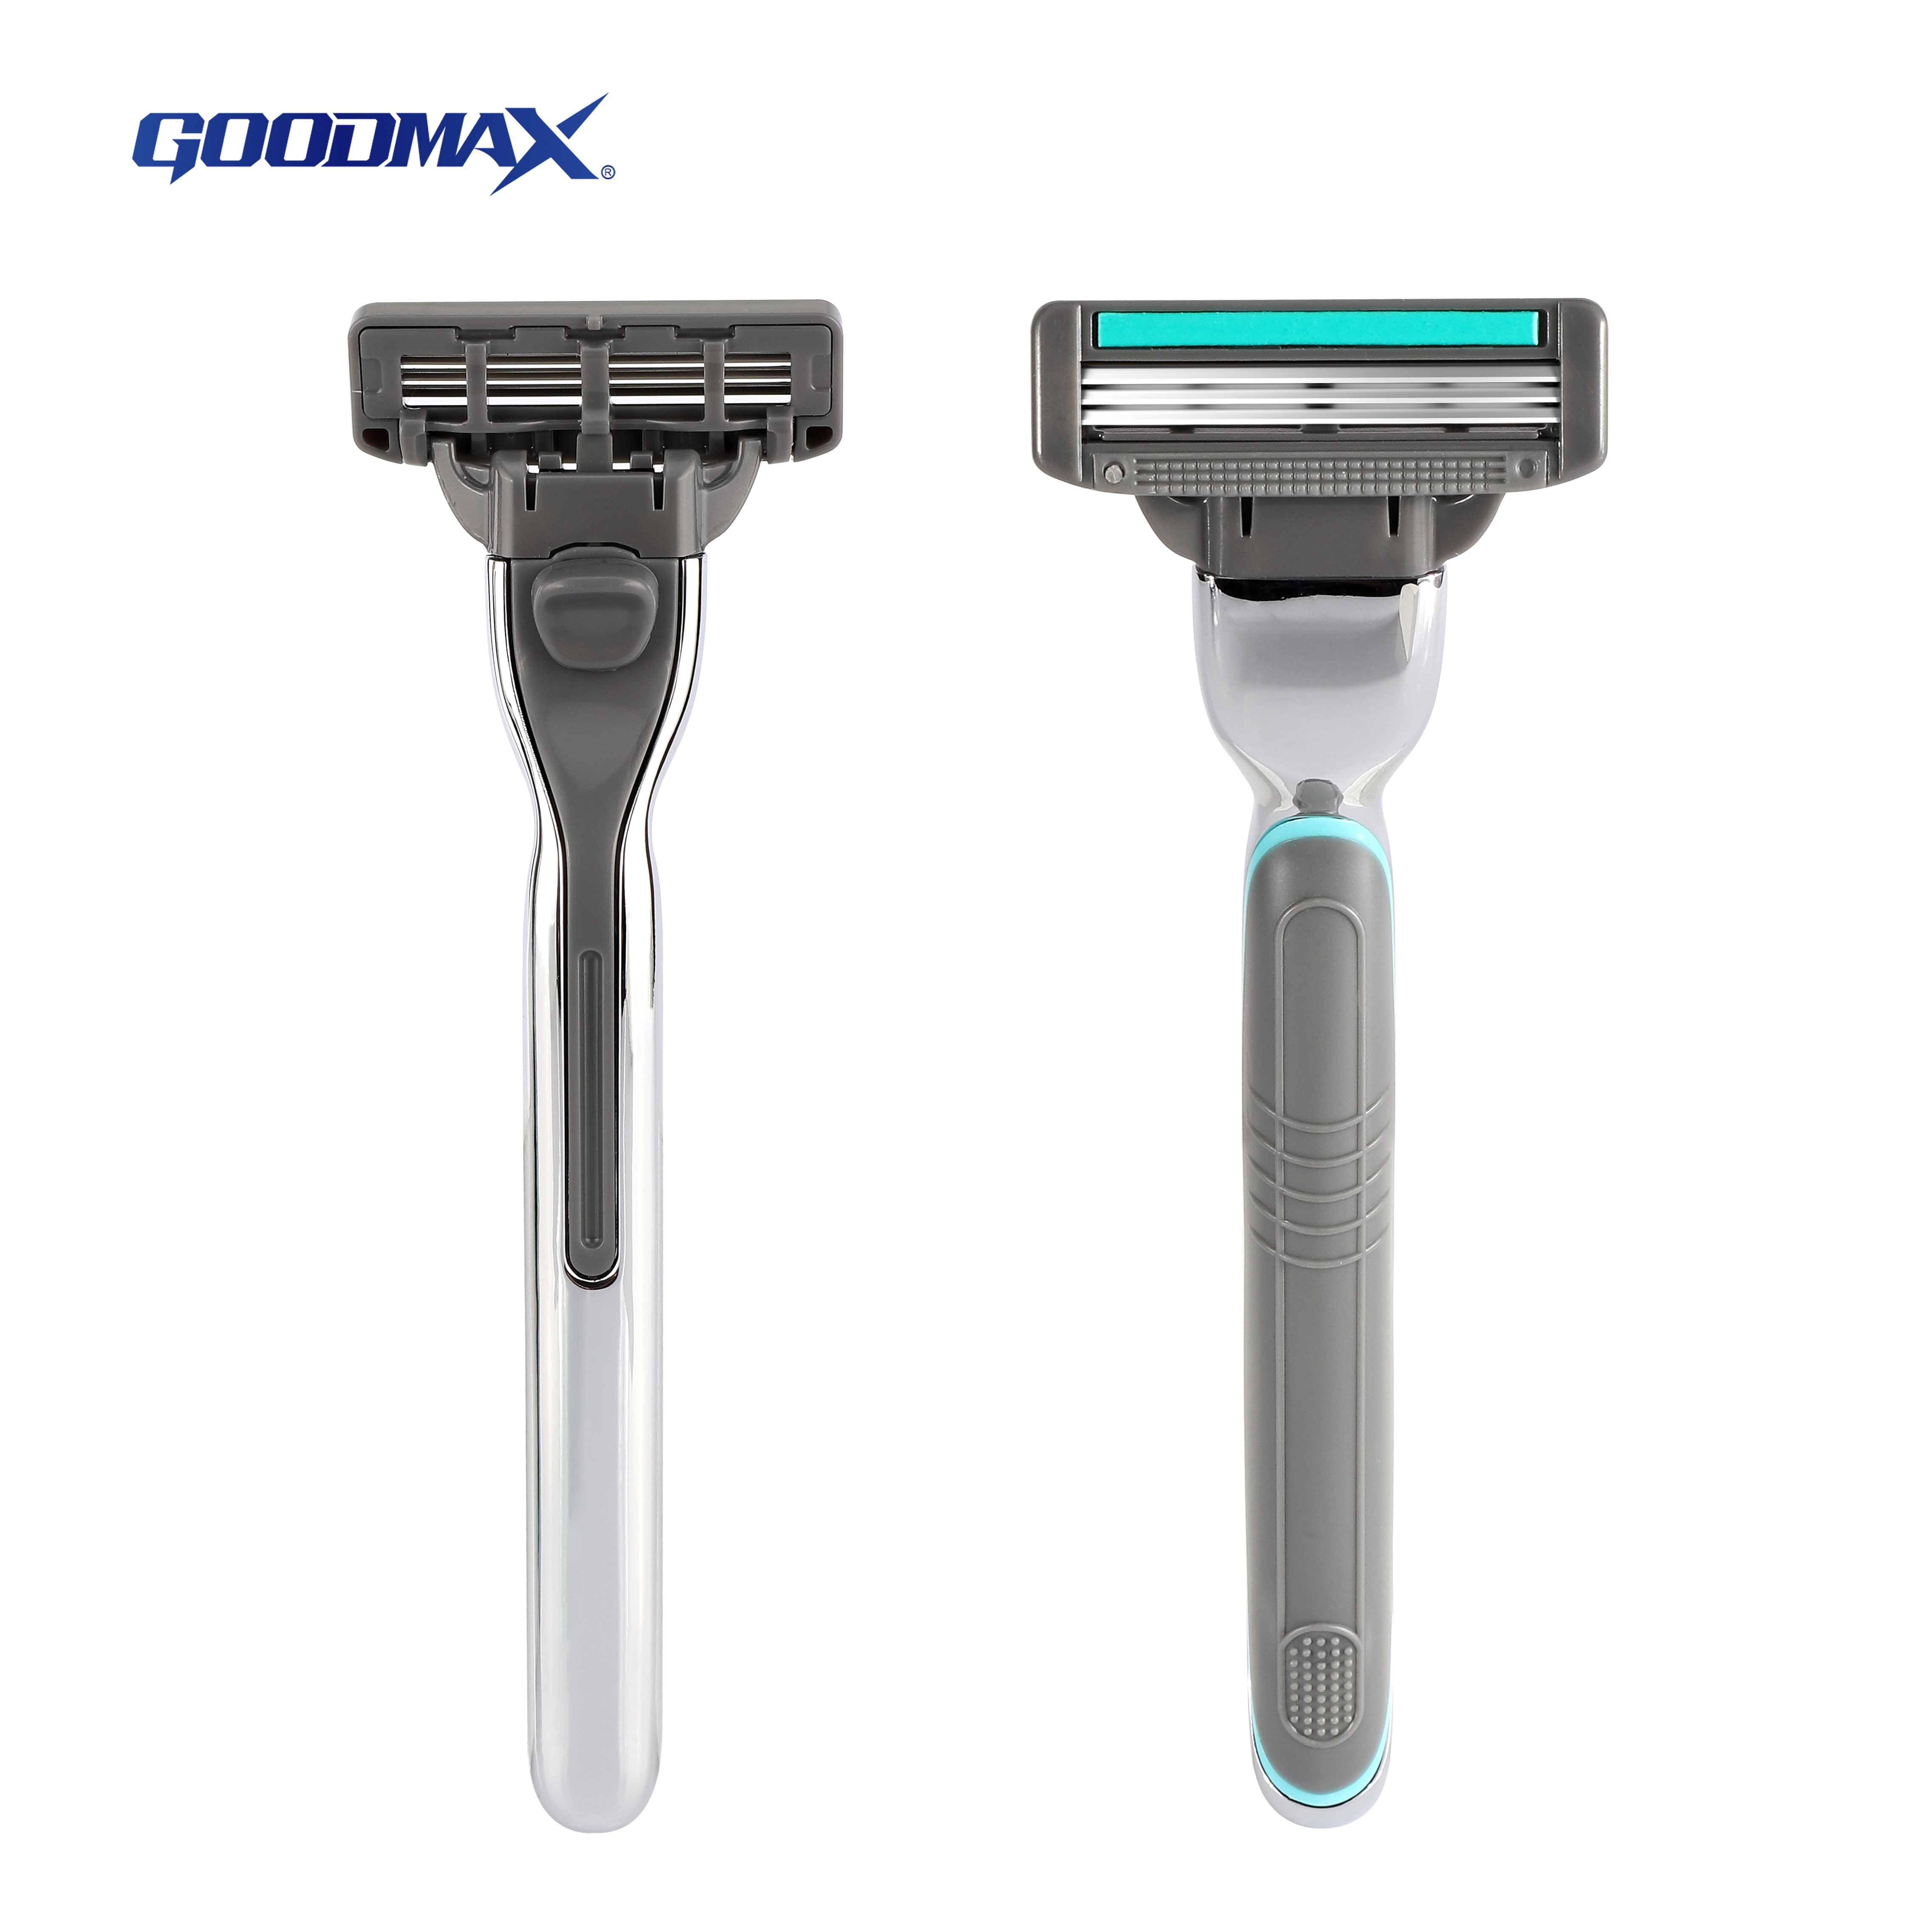 Razor for Men: Best Razors for Men for a Close and Comfortable Shave - The Economic Times